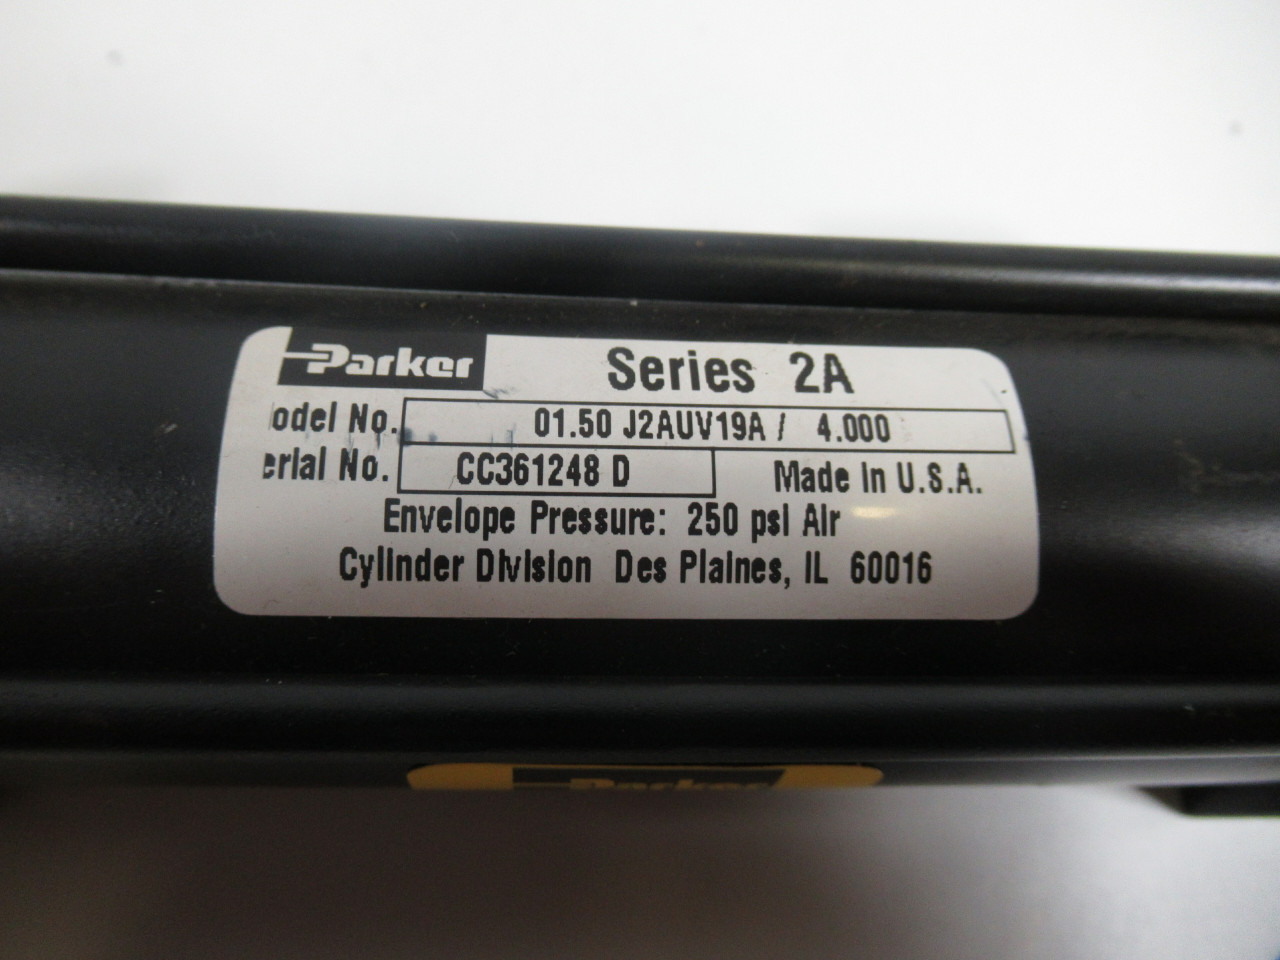 Parker 01.50-J2AUV19A-4.000 Pneumatic Cylinder 1.5" Bore 4" Stroke USED